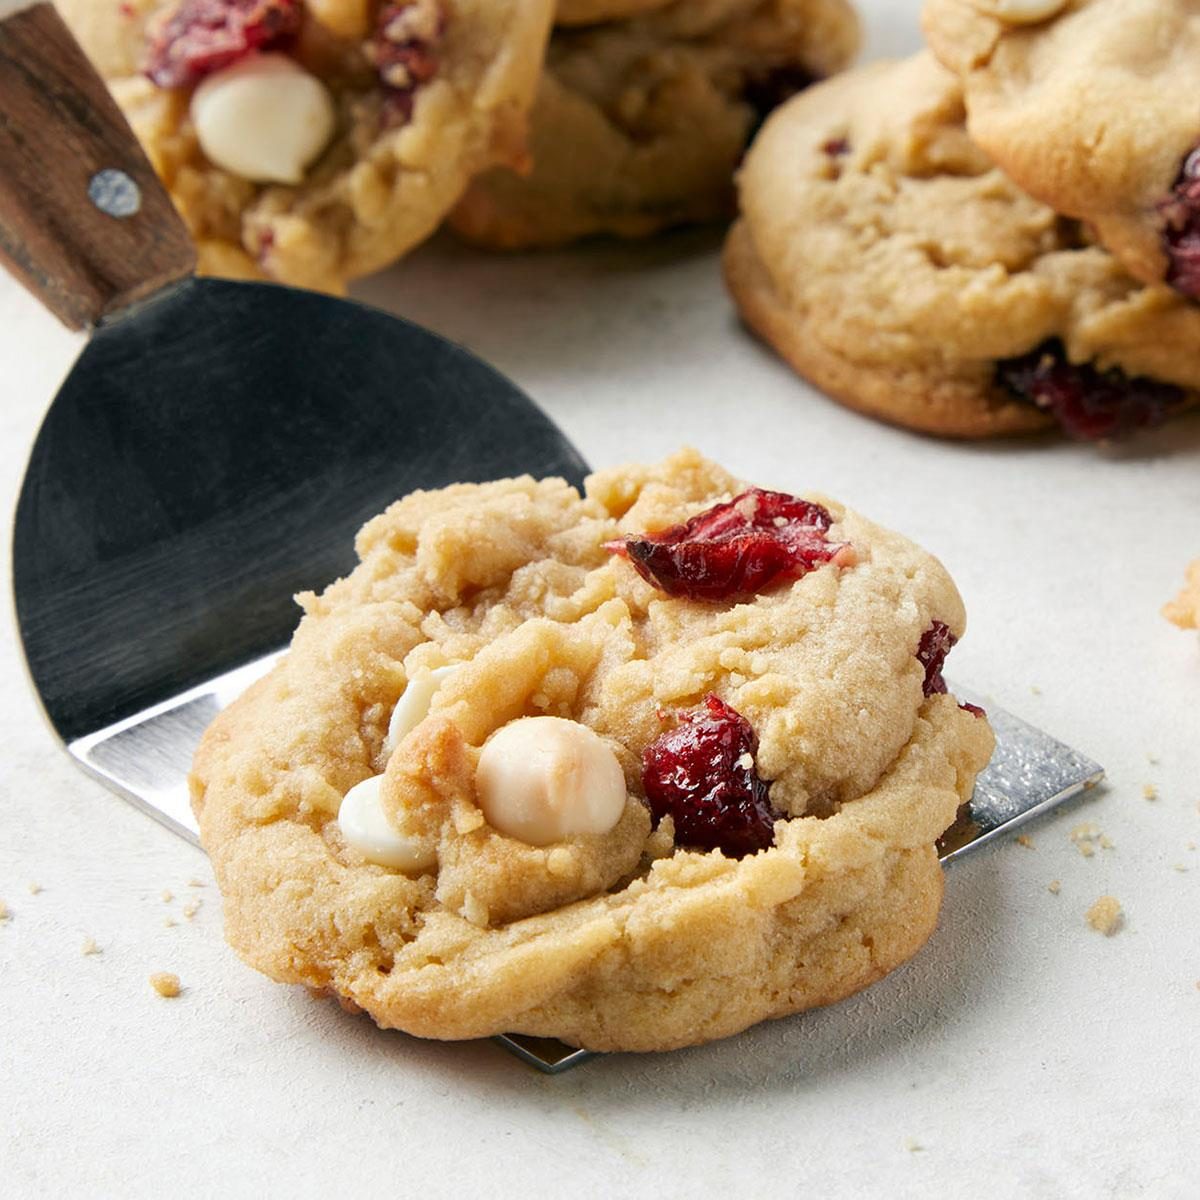 White Chocolate Cranberry Cookies Exps Tohx25 34899 Dr 12 15 4b